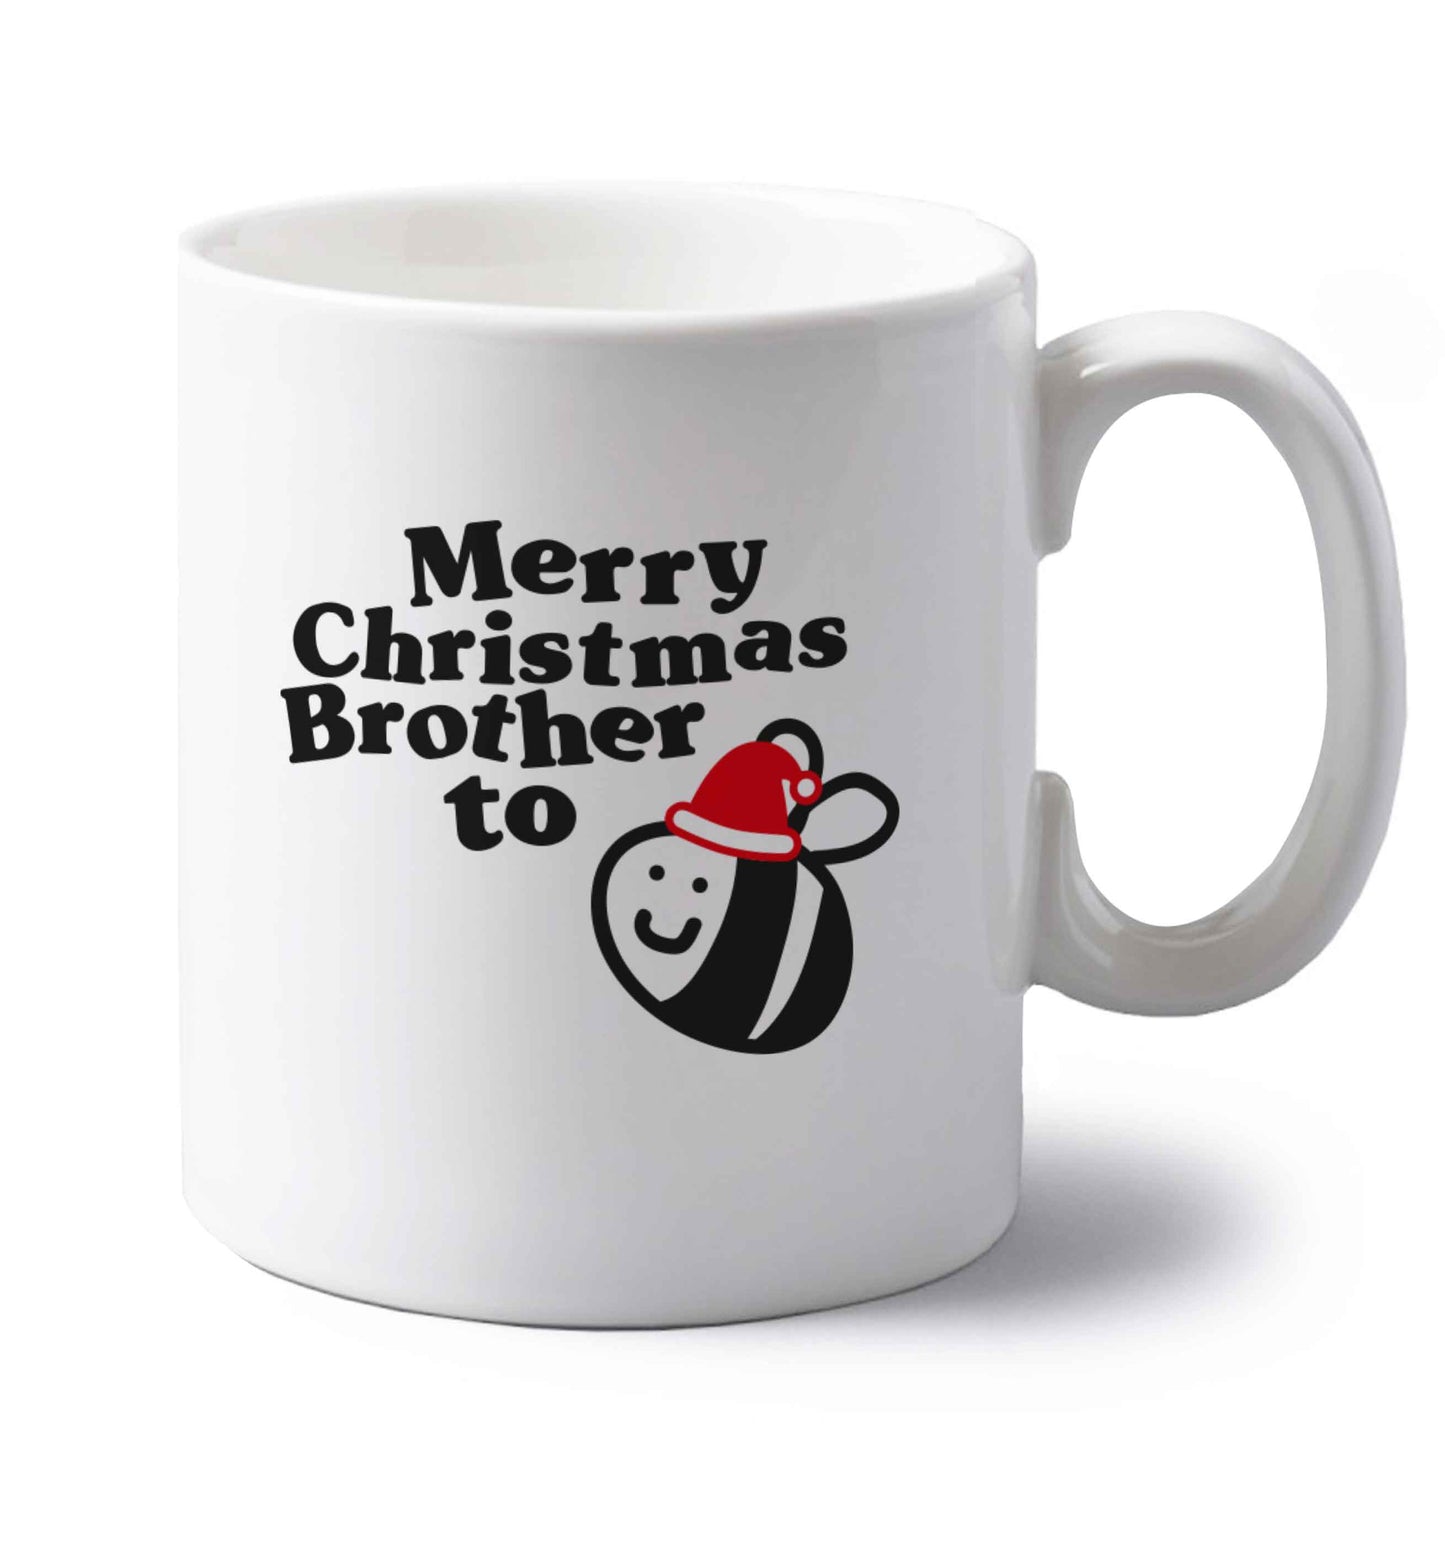 Merry Christmas brother to be left handed white ceramic mug 